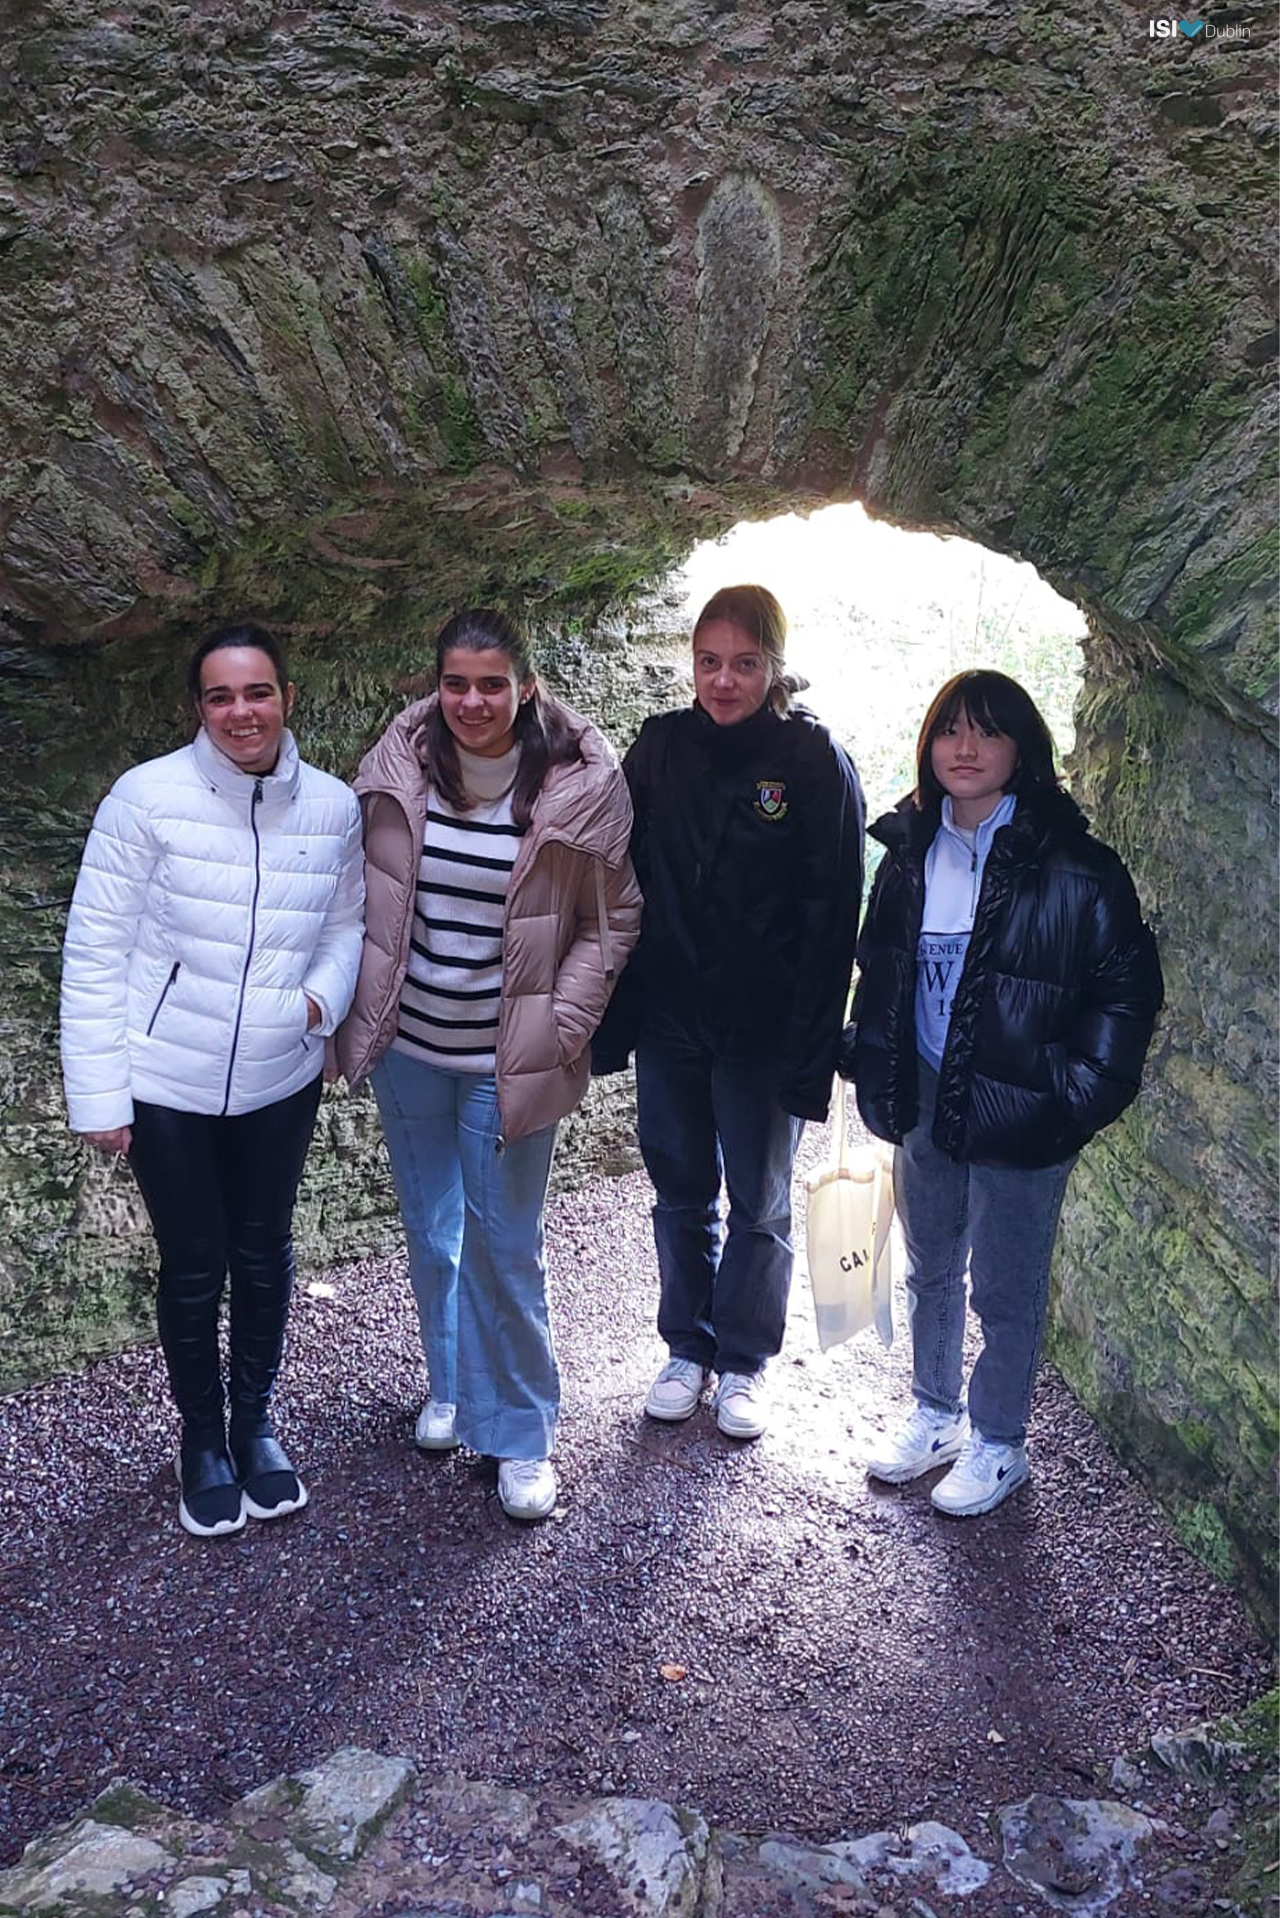 The girls at Blarney Castle